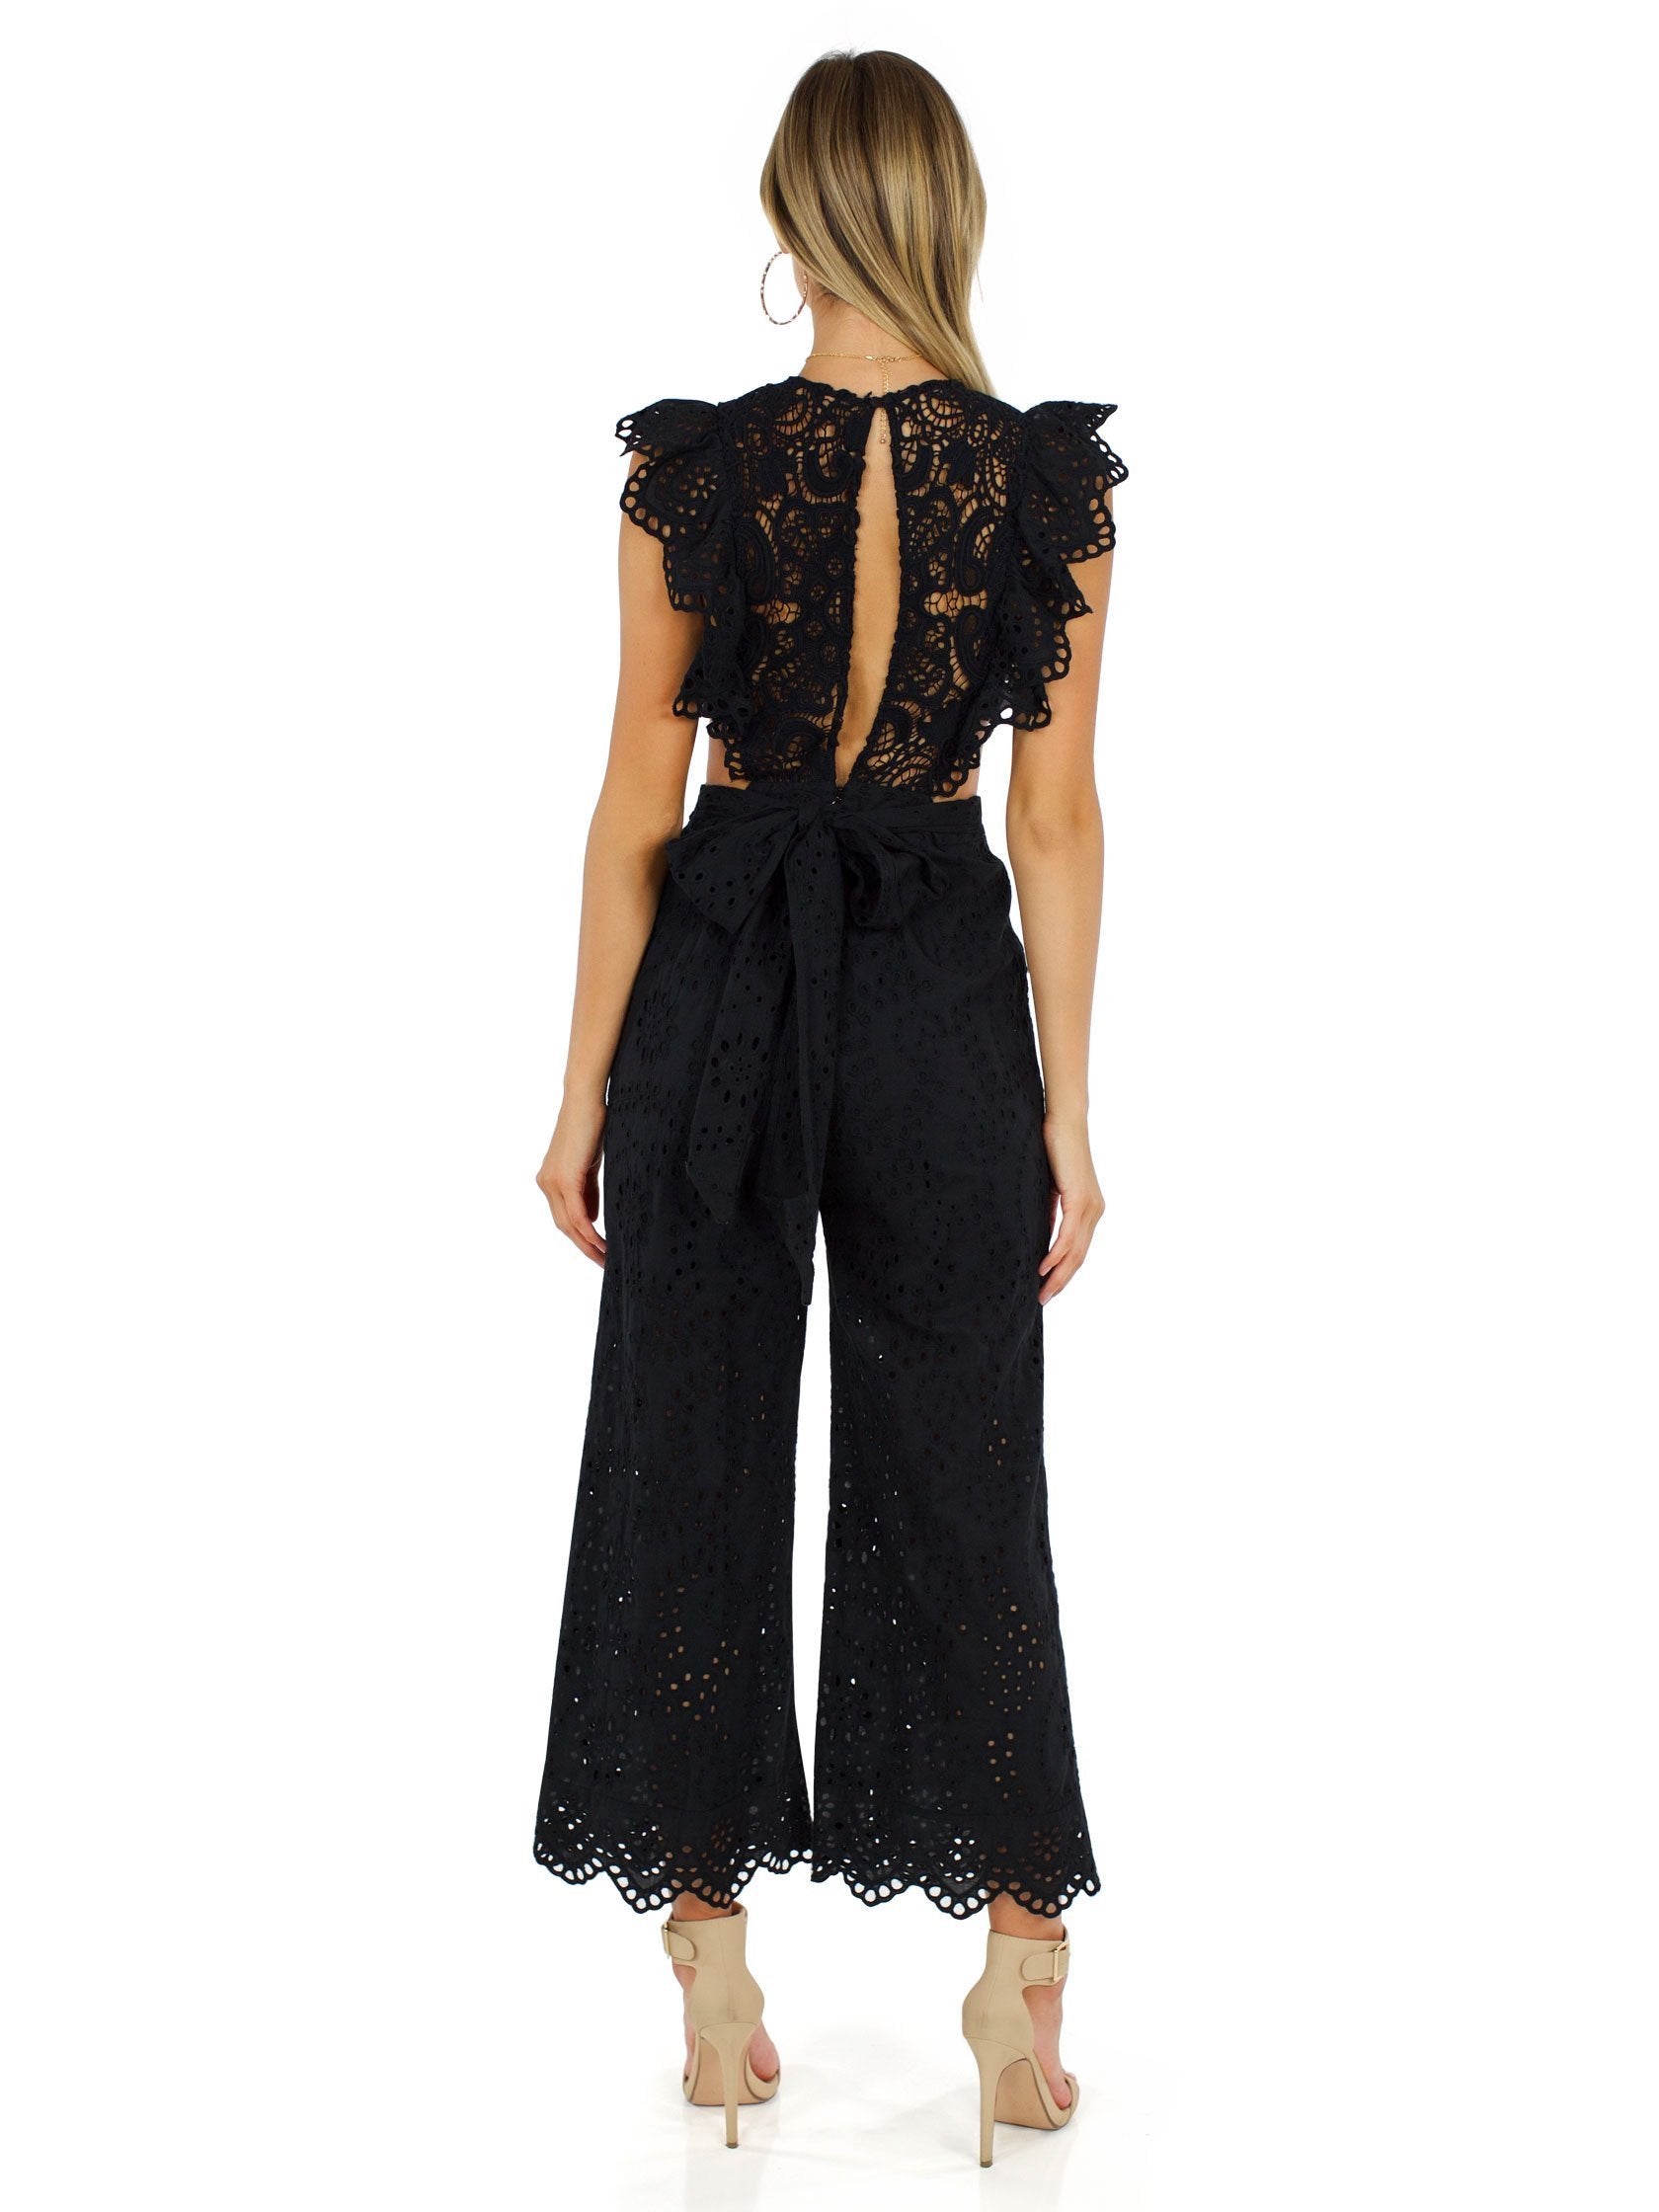 Women wearing a jumpsuit rental from Nightcap Clothing called Eyelet Apron Jumpsuit